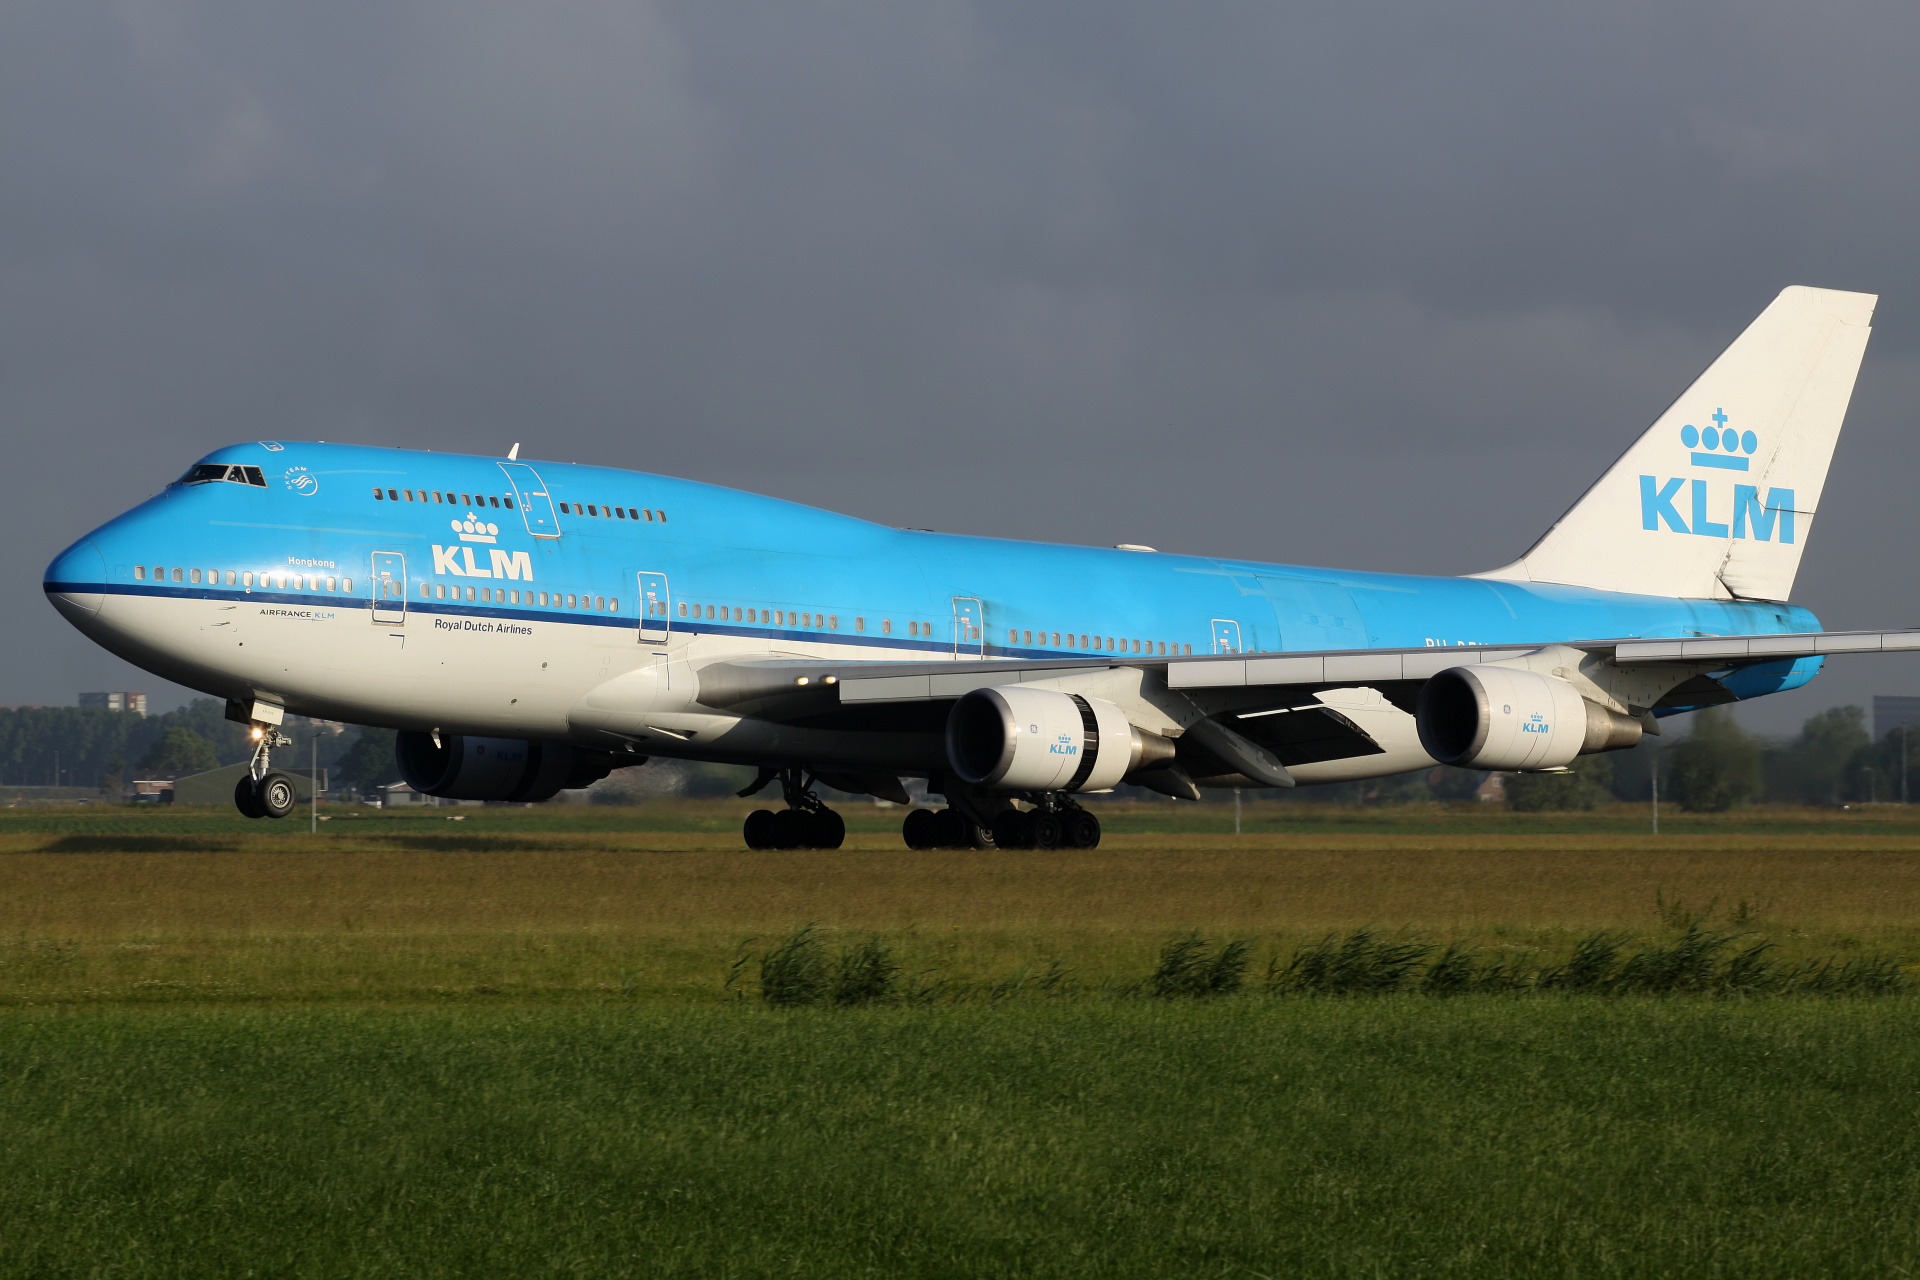 400M, PH-BFH, KLM Royal Dutch Airlines (Aircraft » Schiphol Spotting » Boeing 747-400)